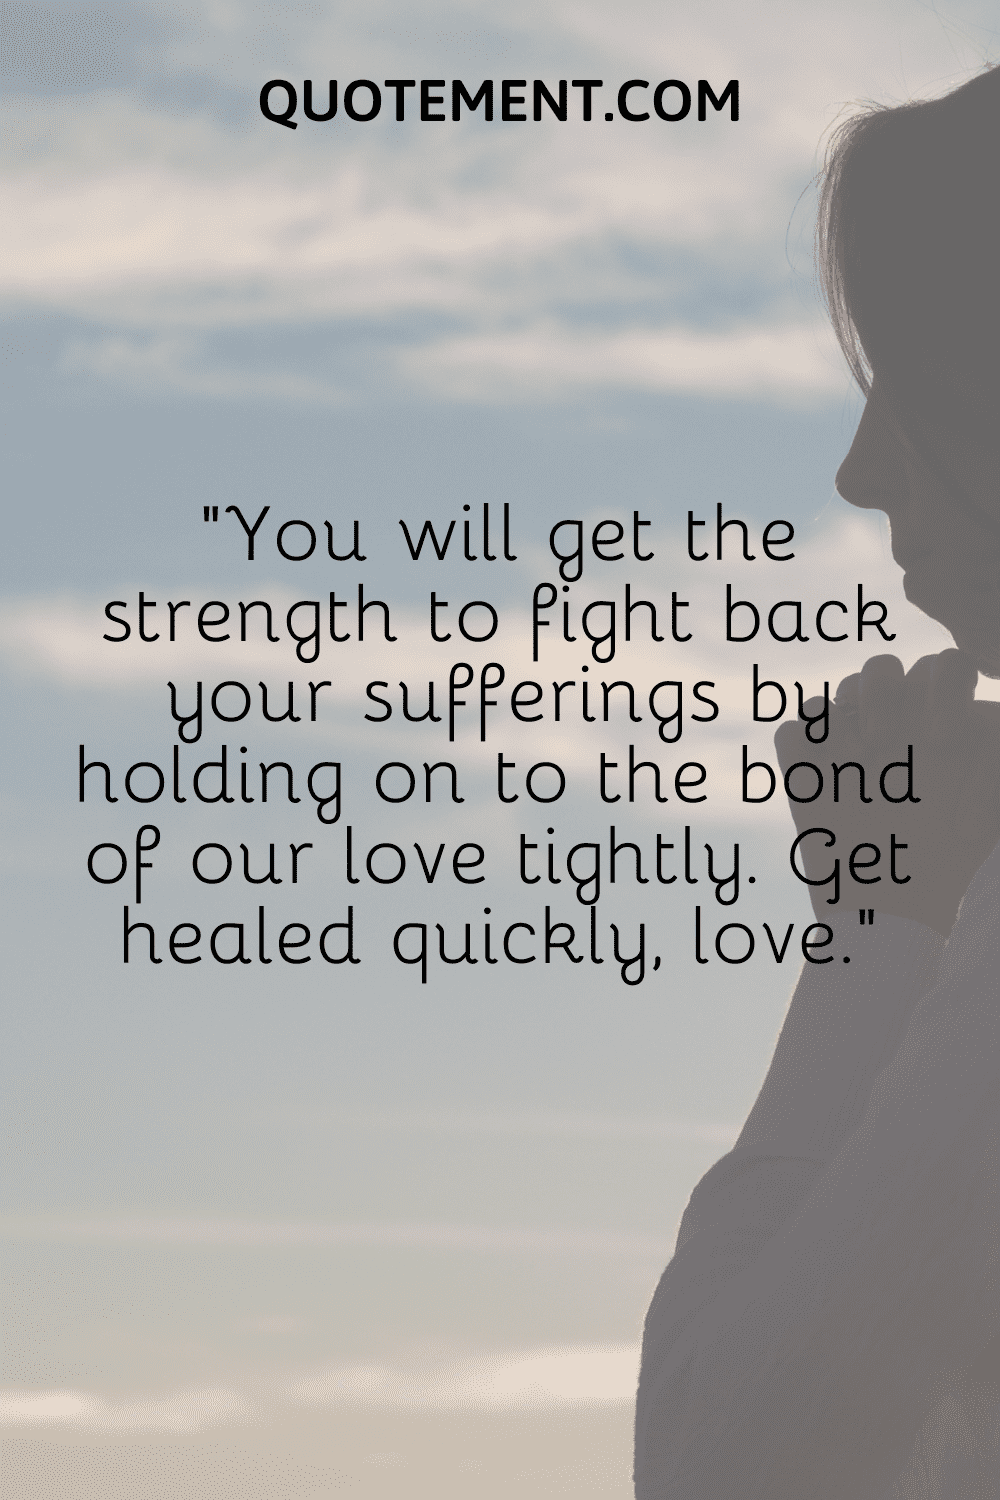 You will get the strength to fight back your sufferings